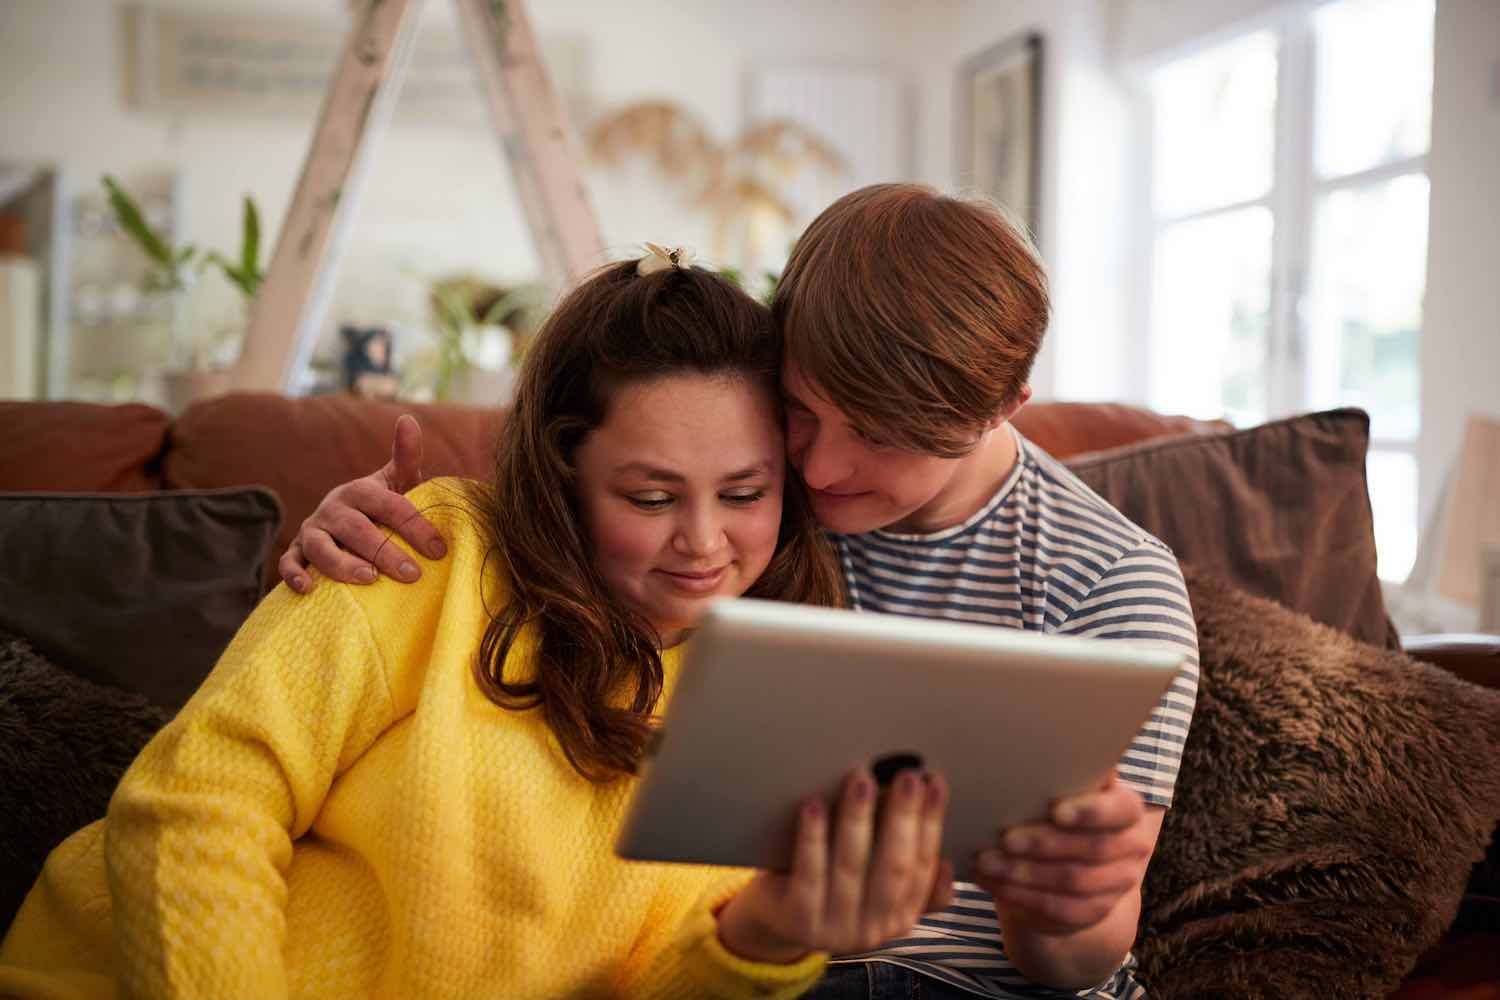 A man and woman are sitting on a couch looking at a tablet.